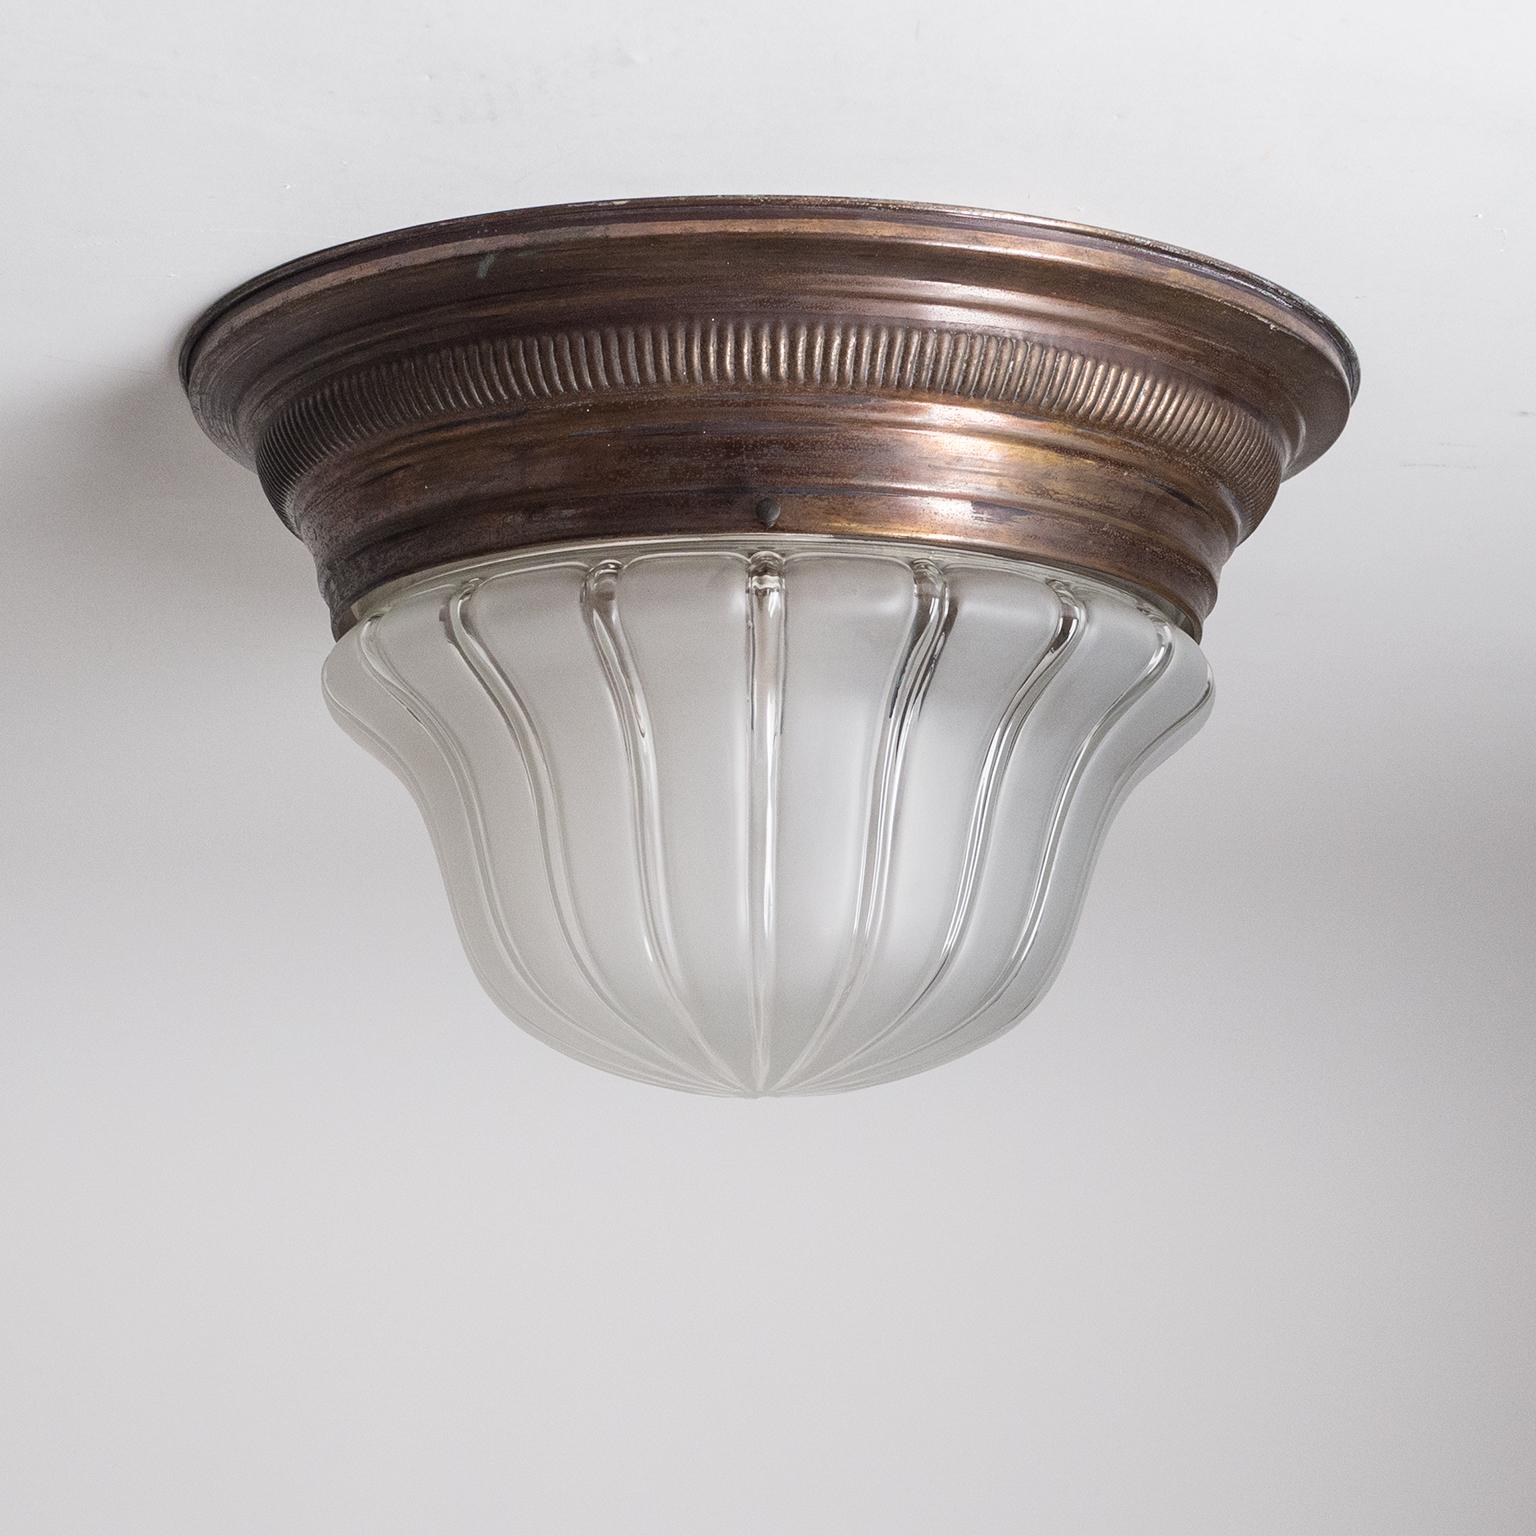 Fine Art Deco flush mount, circa 1910. Patinated brass hardware with an elegantly shaped glass diffuser with a striped satin finish. Nice original condition with patina on the brass. One original brass and ceramic E27 socket with new wiring.